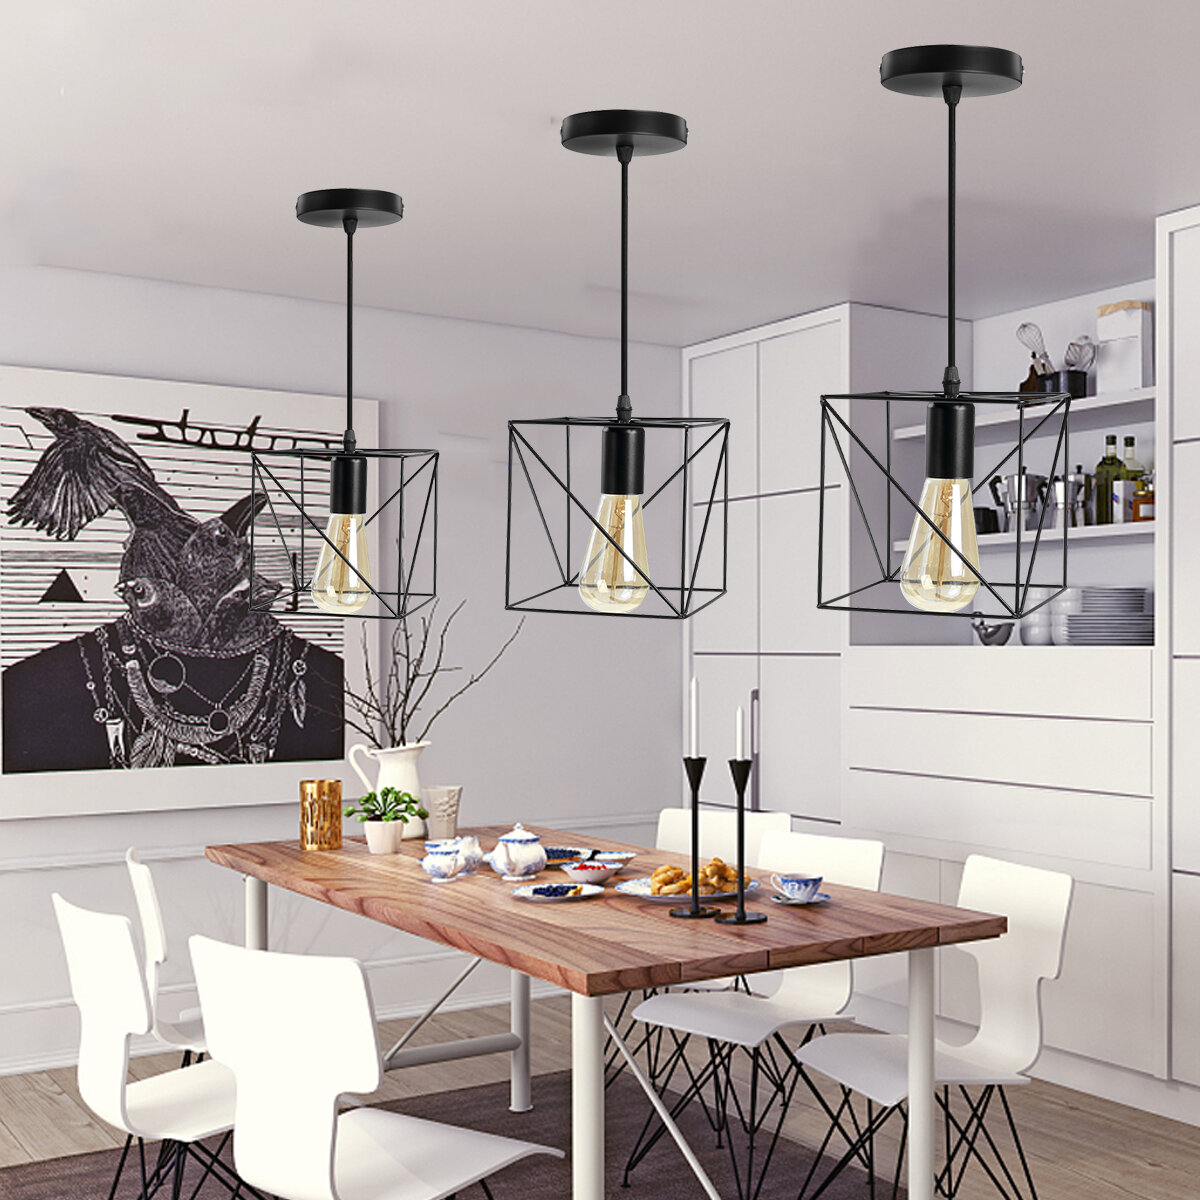 best price,metal,pendant,light,shade,ceiling,industrial,geometric,wire,cage,lamp,eu,coupon,price,discount